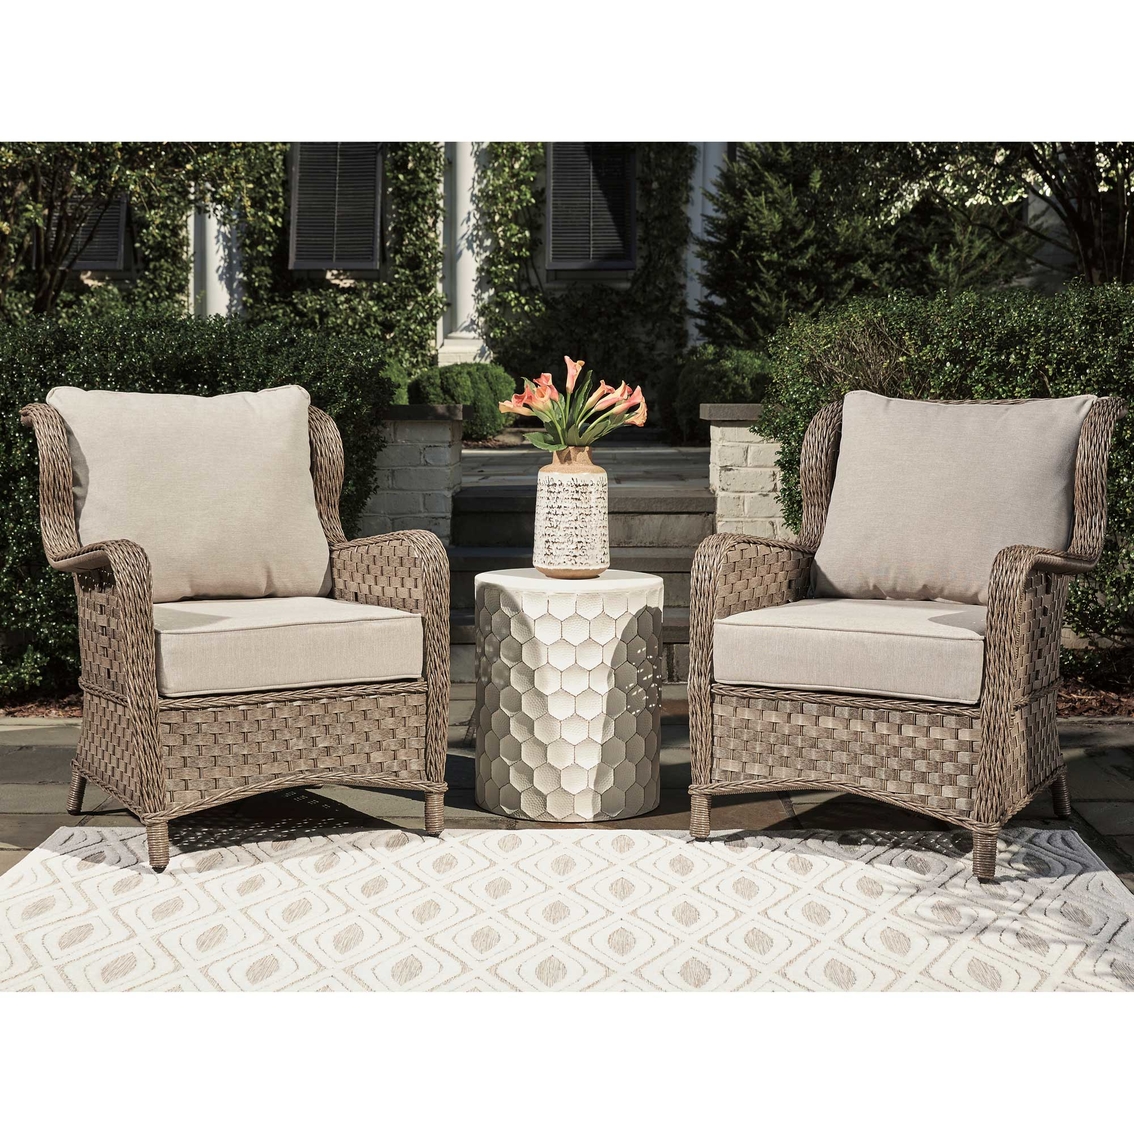 Signature Design by Ashley Clear Ridge 4 pc. Outdoor Seating Set - Image 4 of 6